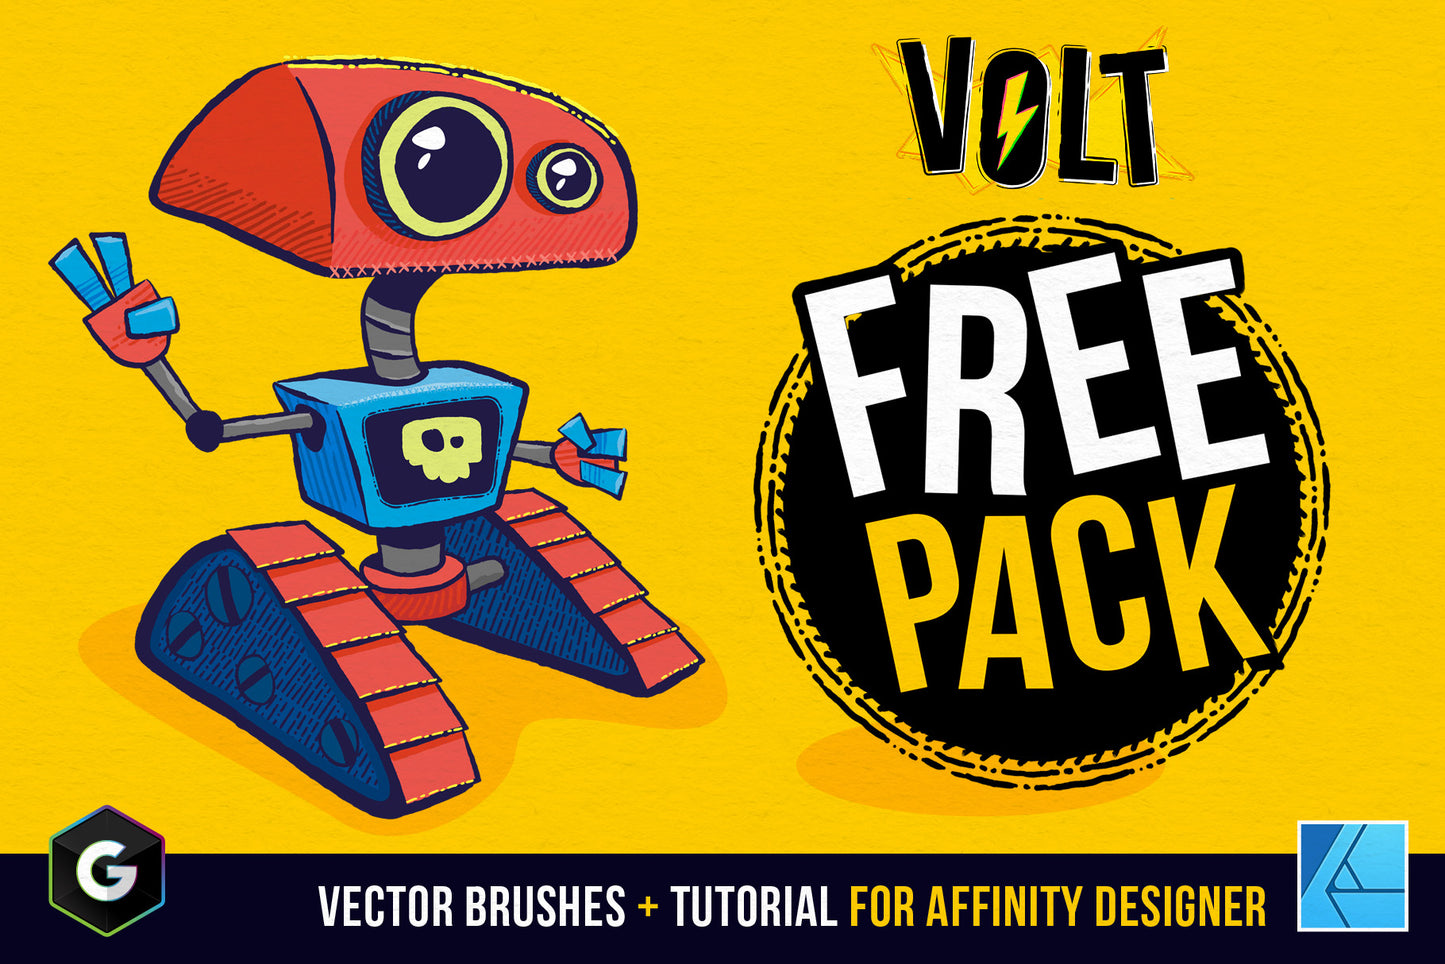 VOLT - FREE Vector Brush Mini Pack and Tutorial